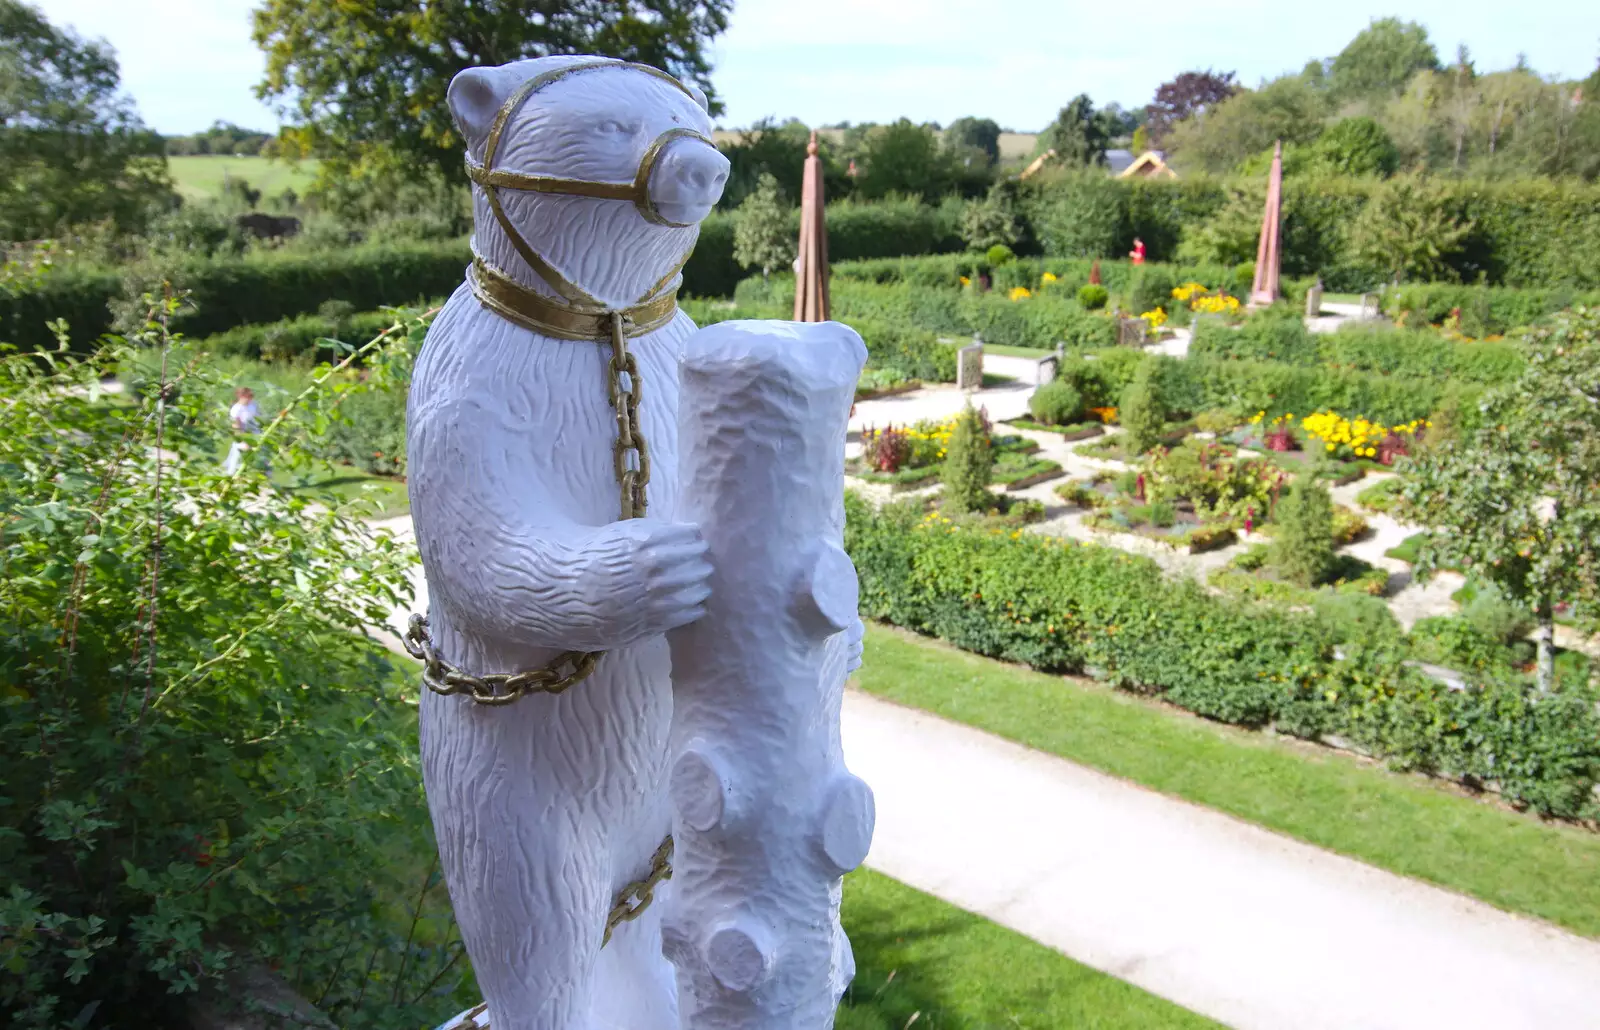 A bear with a ragged stump in the garden, from Kenilworth Castle and the 69th Entry Reunion Dinner, Stratford, Warwickshire - 14th September 2019